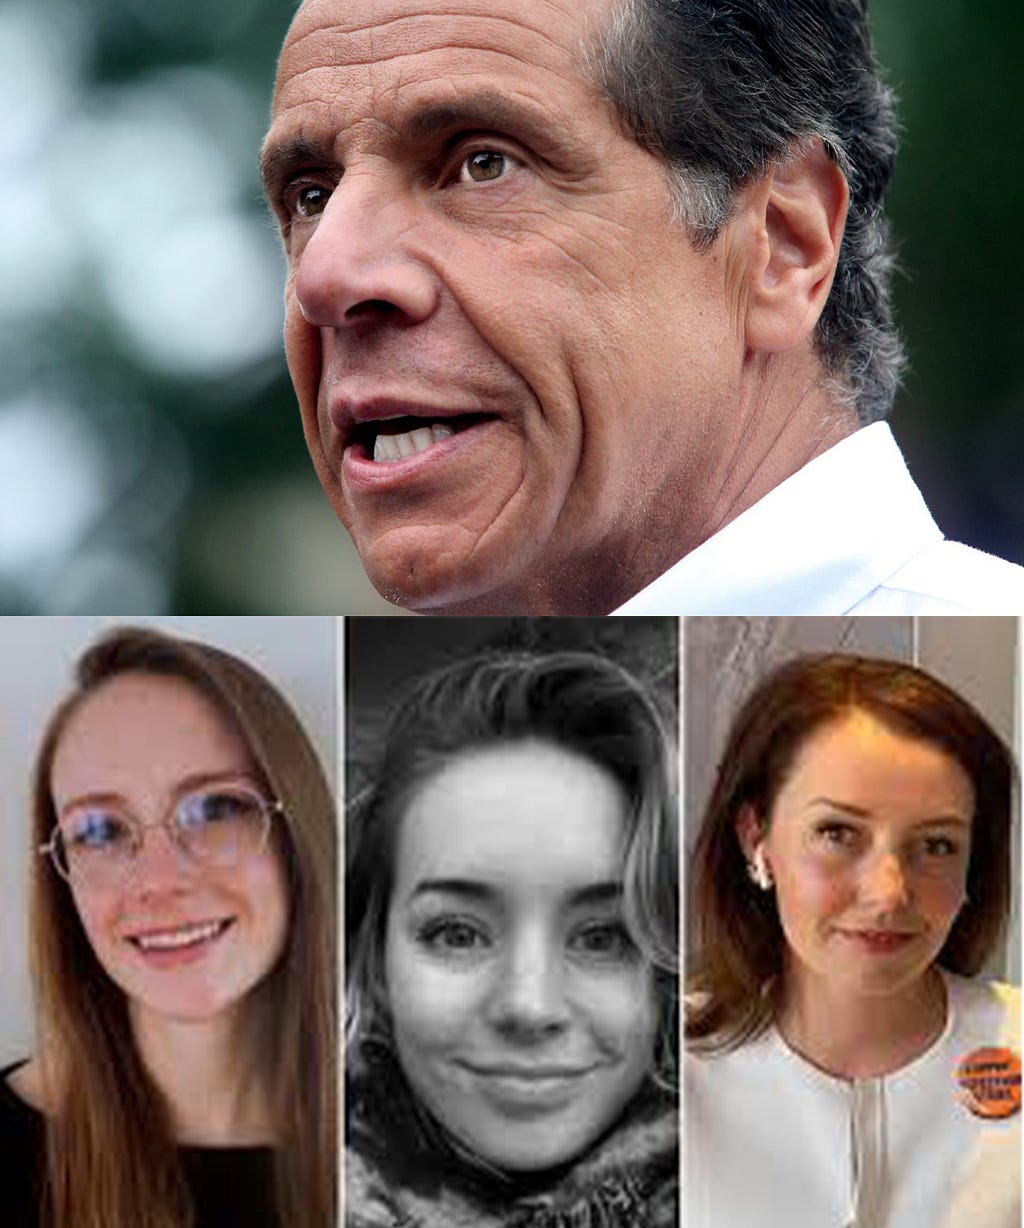 Cuomo and three of his accusers, Charlotte Bennet, Anna Ruch and Lindsey Boylan